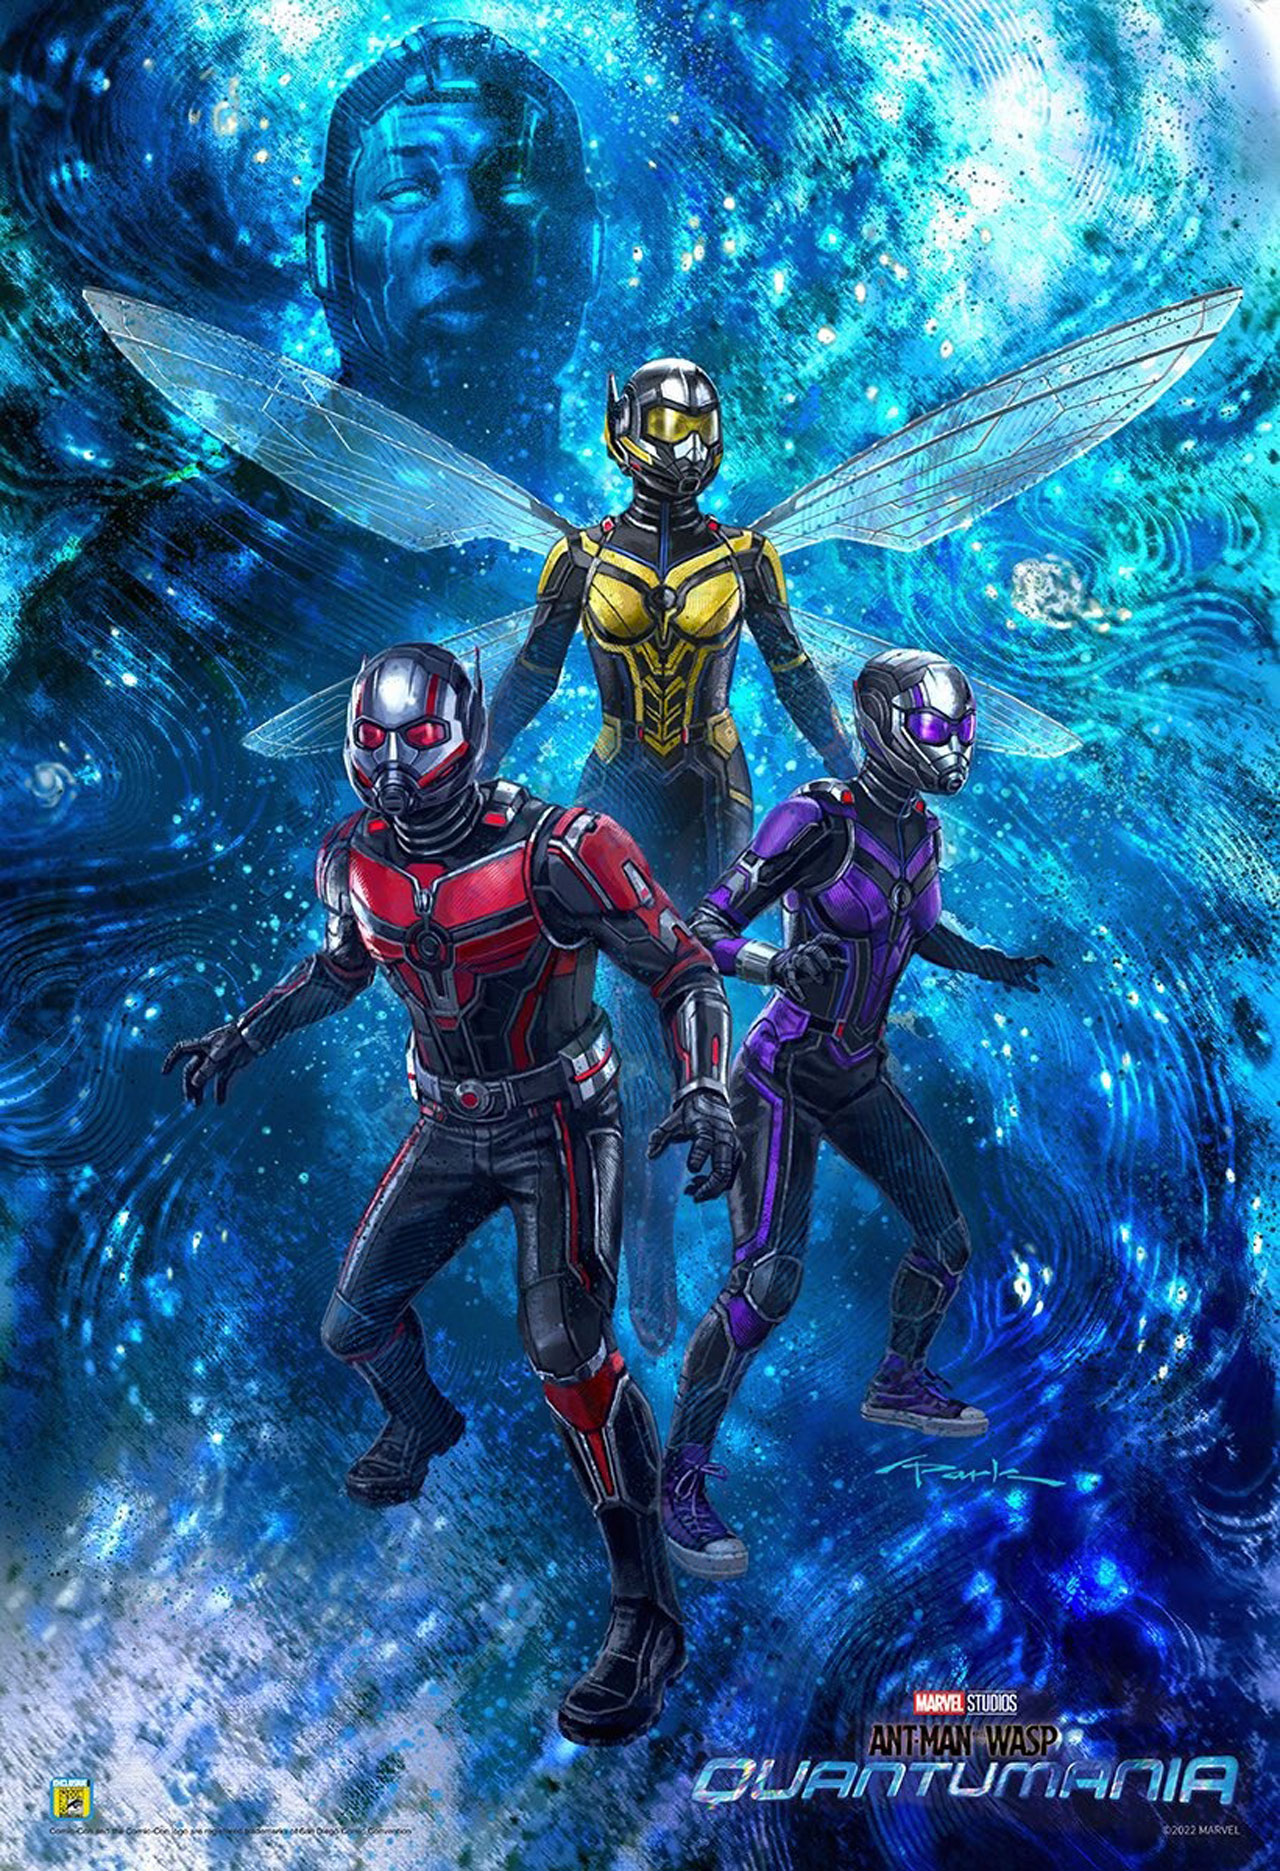 Ant-Man And The Wasp: Quantumania Title Design